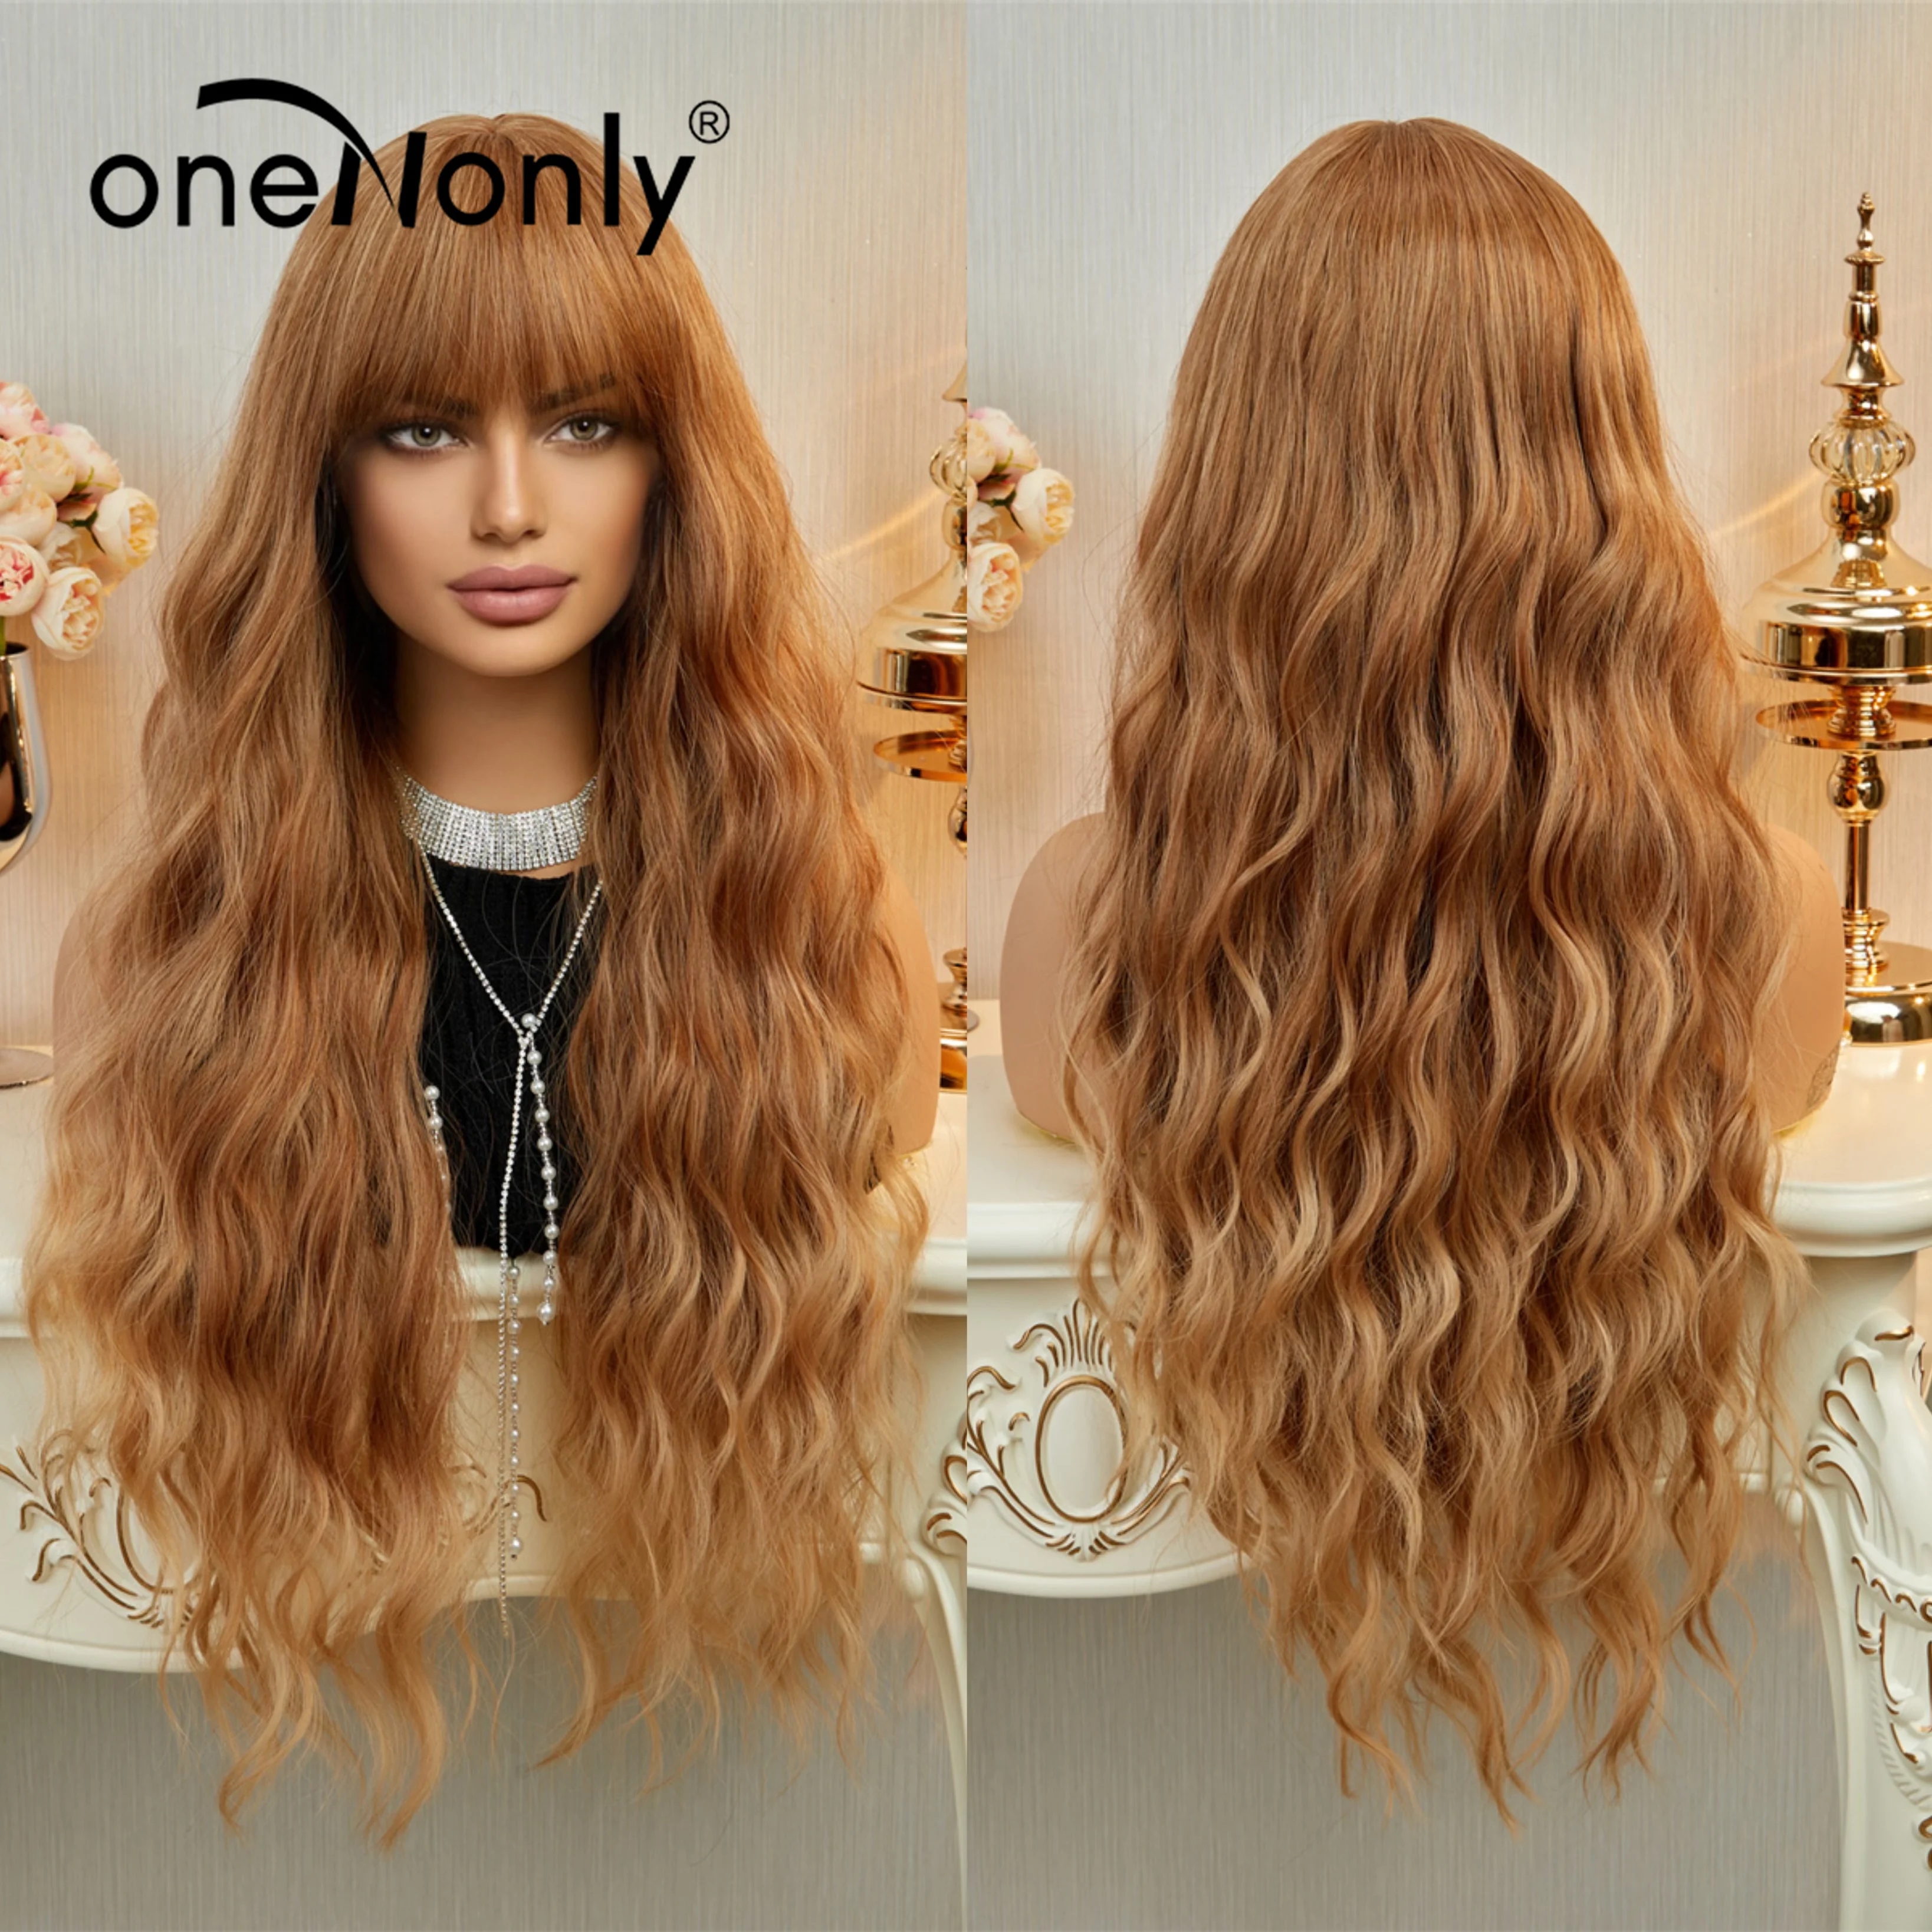 

oneNonly Long Brown Blonde Wig with Bangs Omber Synthetic Wigs for Women Natural Wave Hair Wig Heat Resistant Hair Cosplay Party